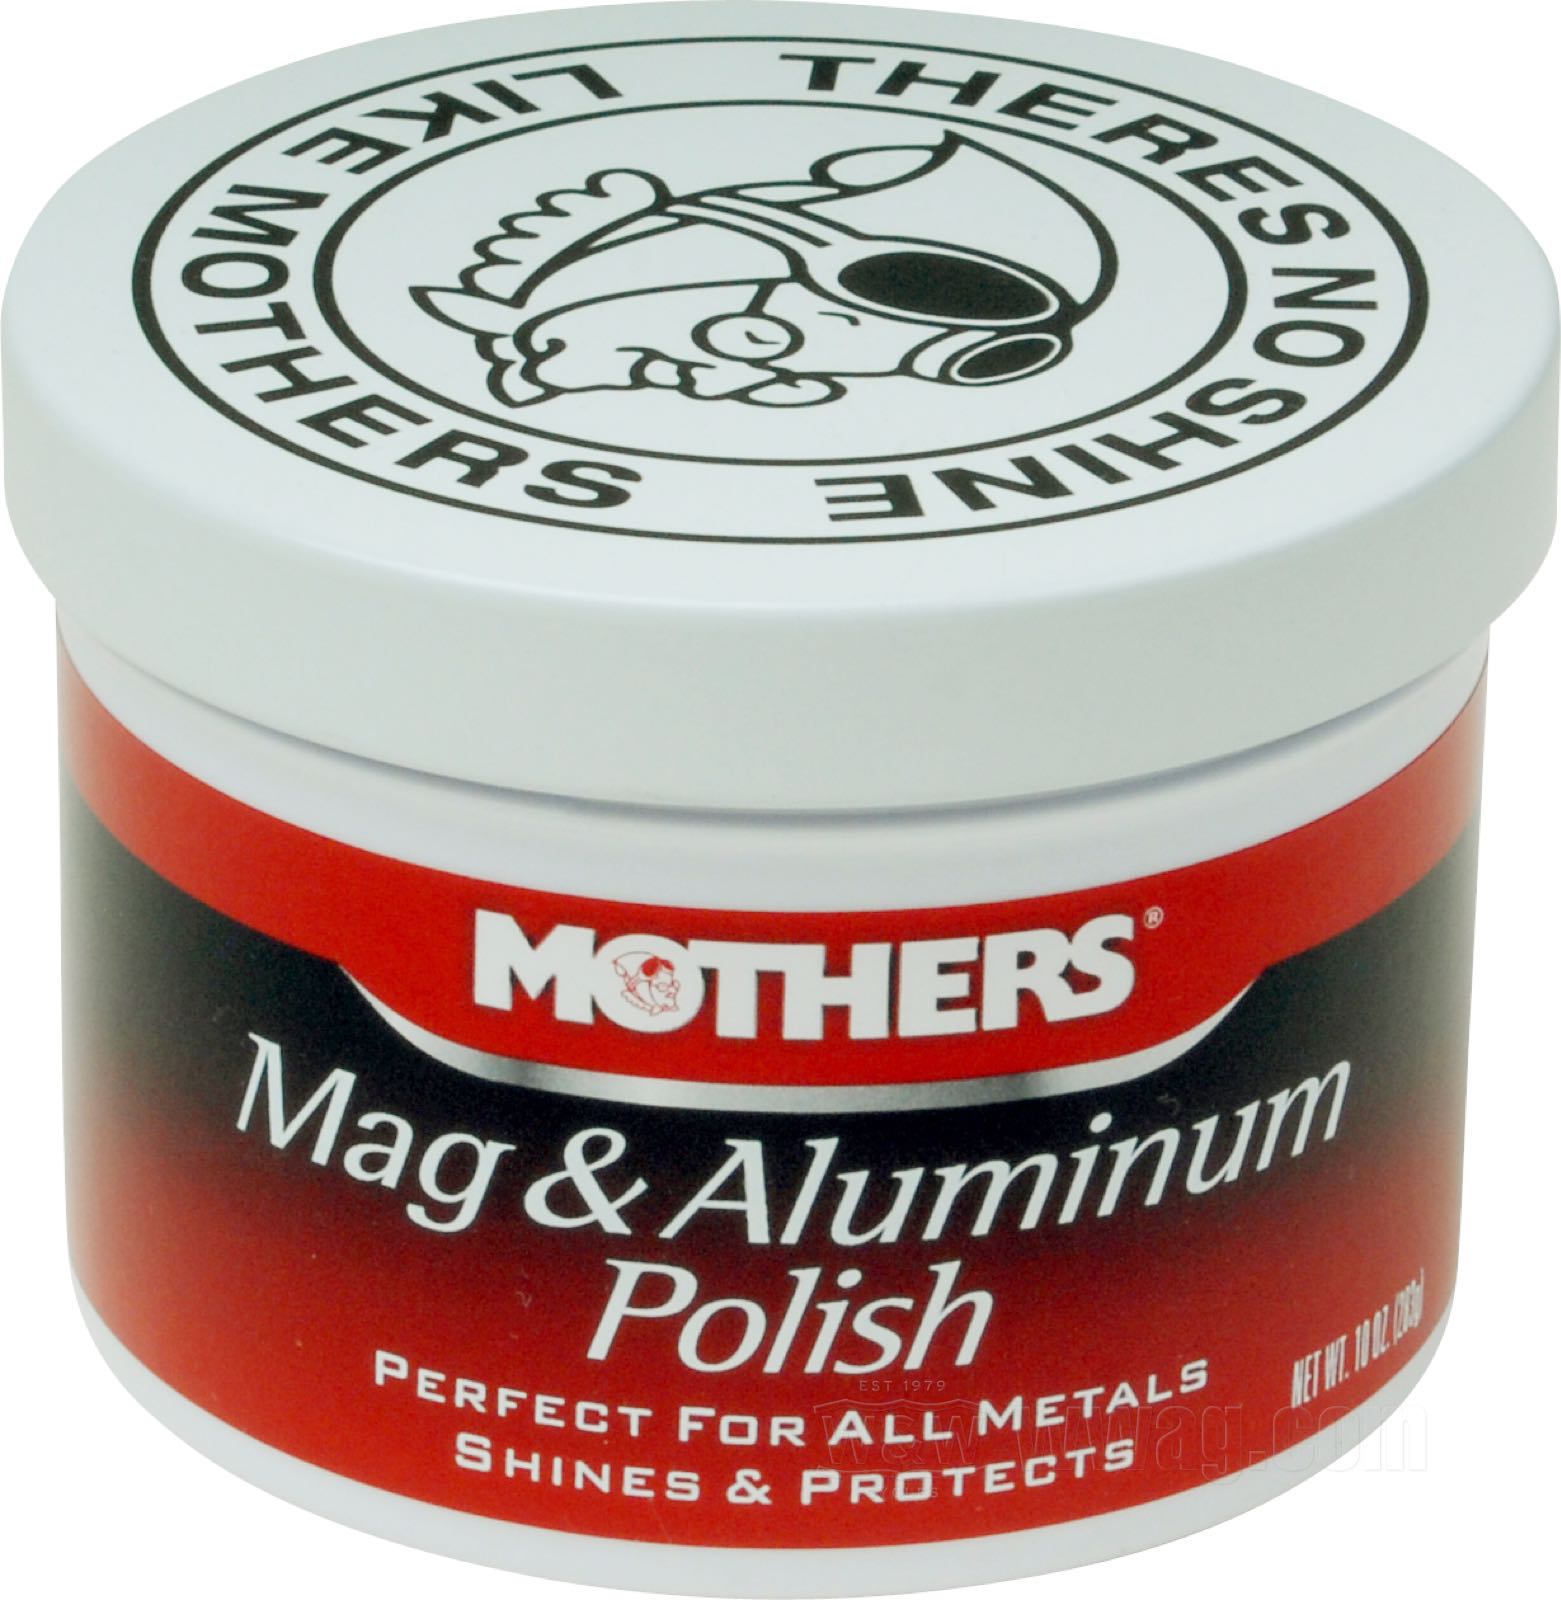 Polish »Mag and Aluminum« by Mothers